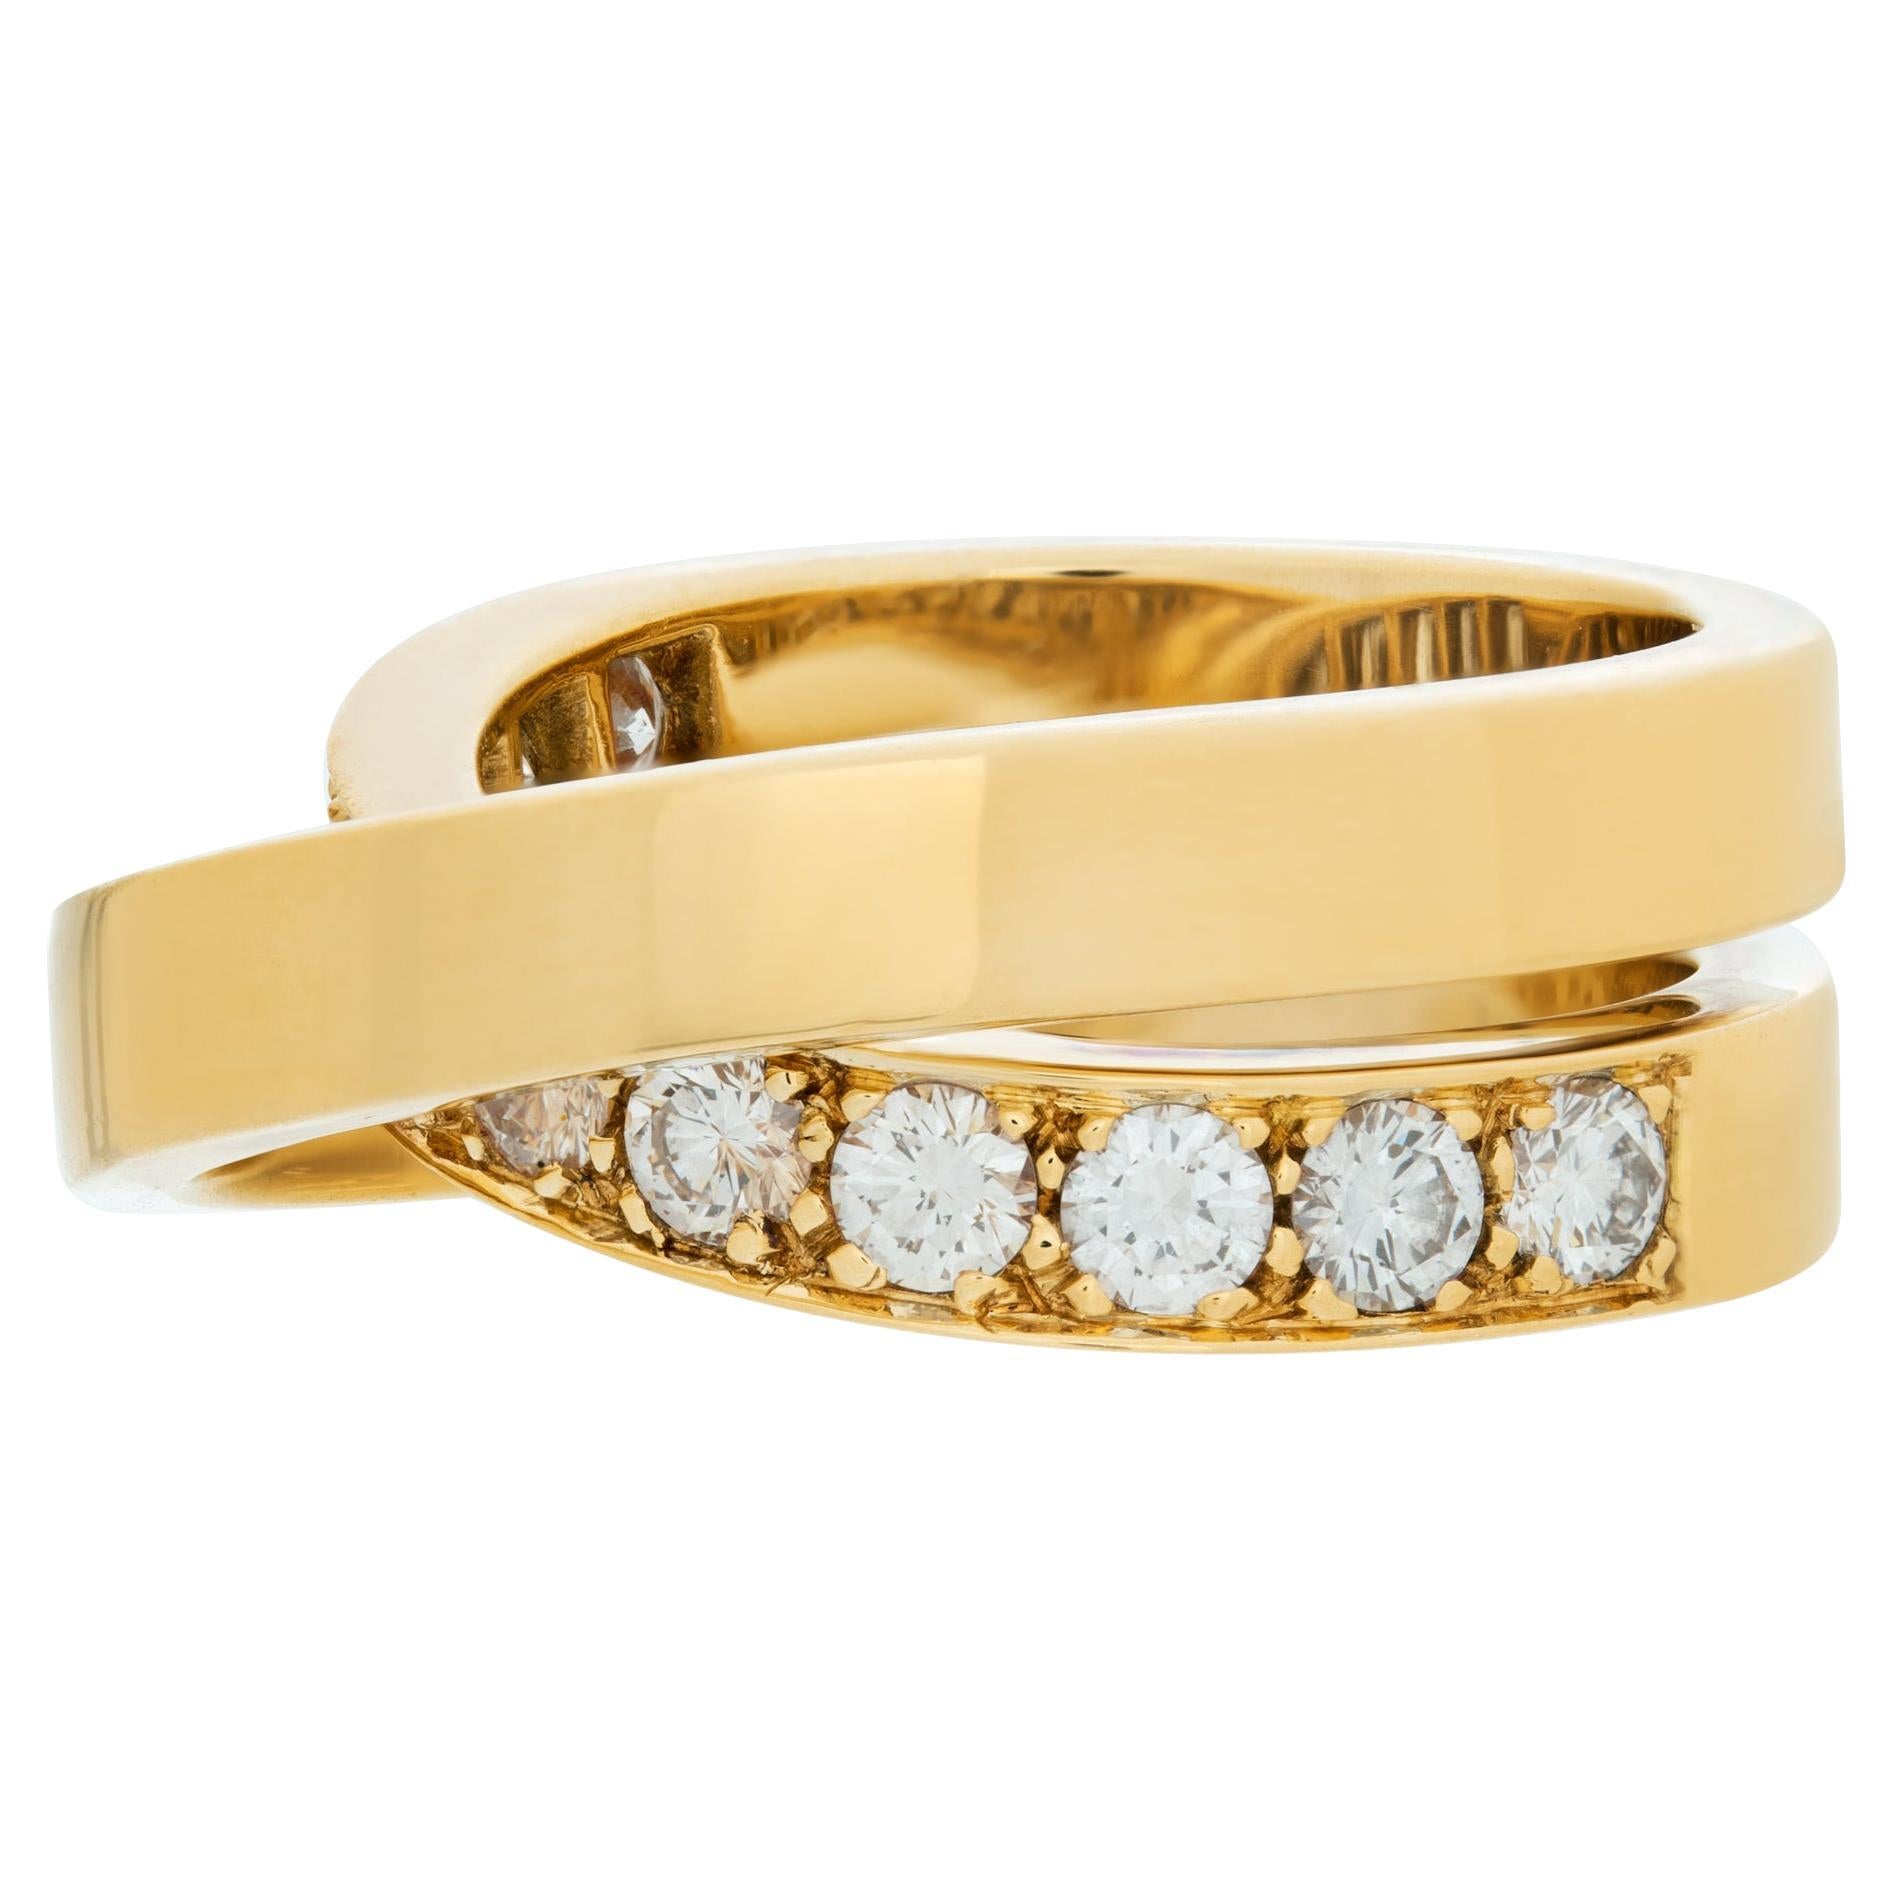 Cartier Nouvelle Vague Crossover Diamond Ring in 18k. 1.10 Carats in Diamonds